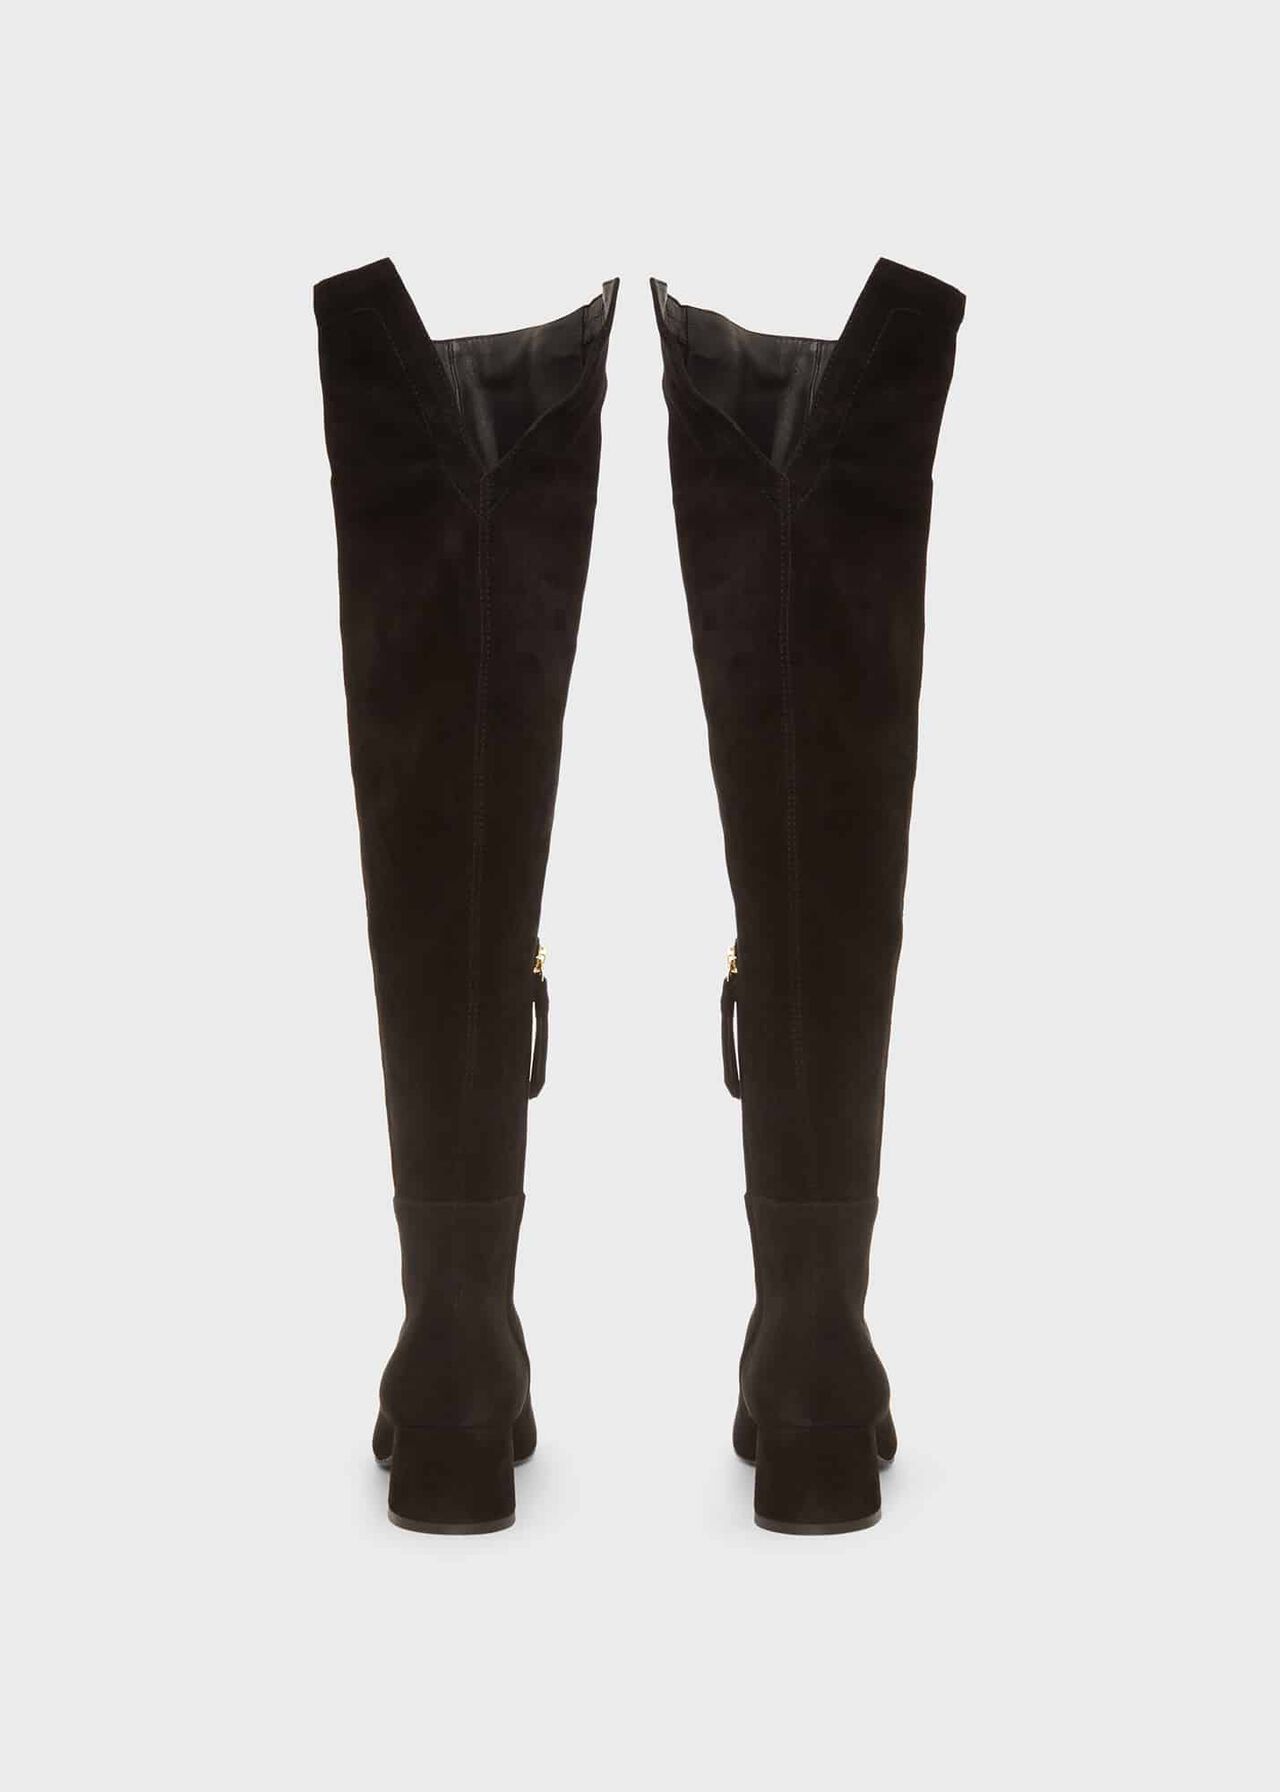 Khloe Leather Over Knee Boots